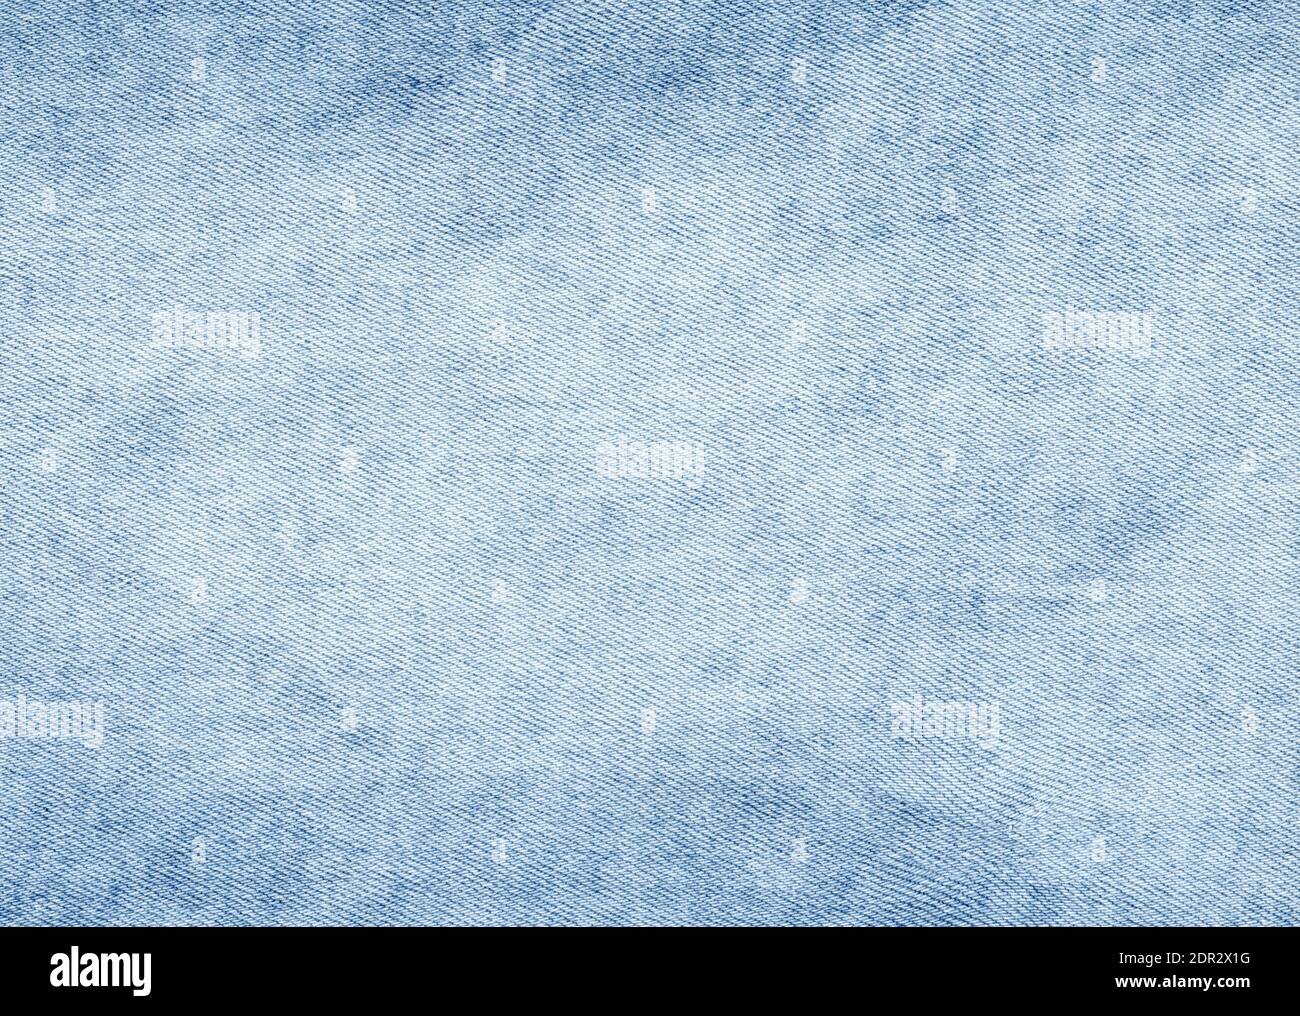 Blue jeans texture background - High resolution Stock Photo